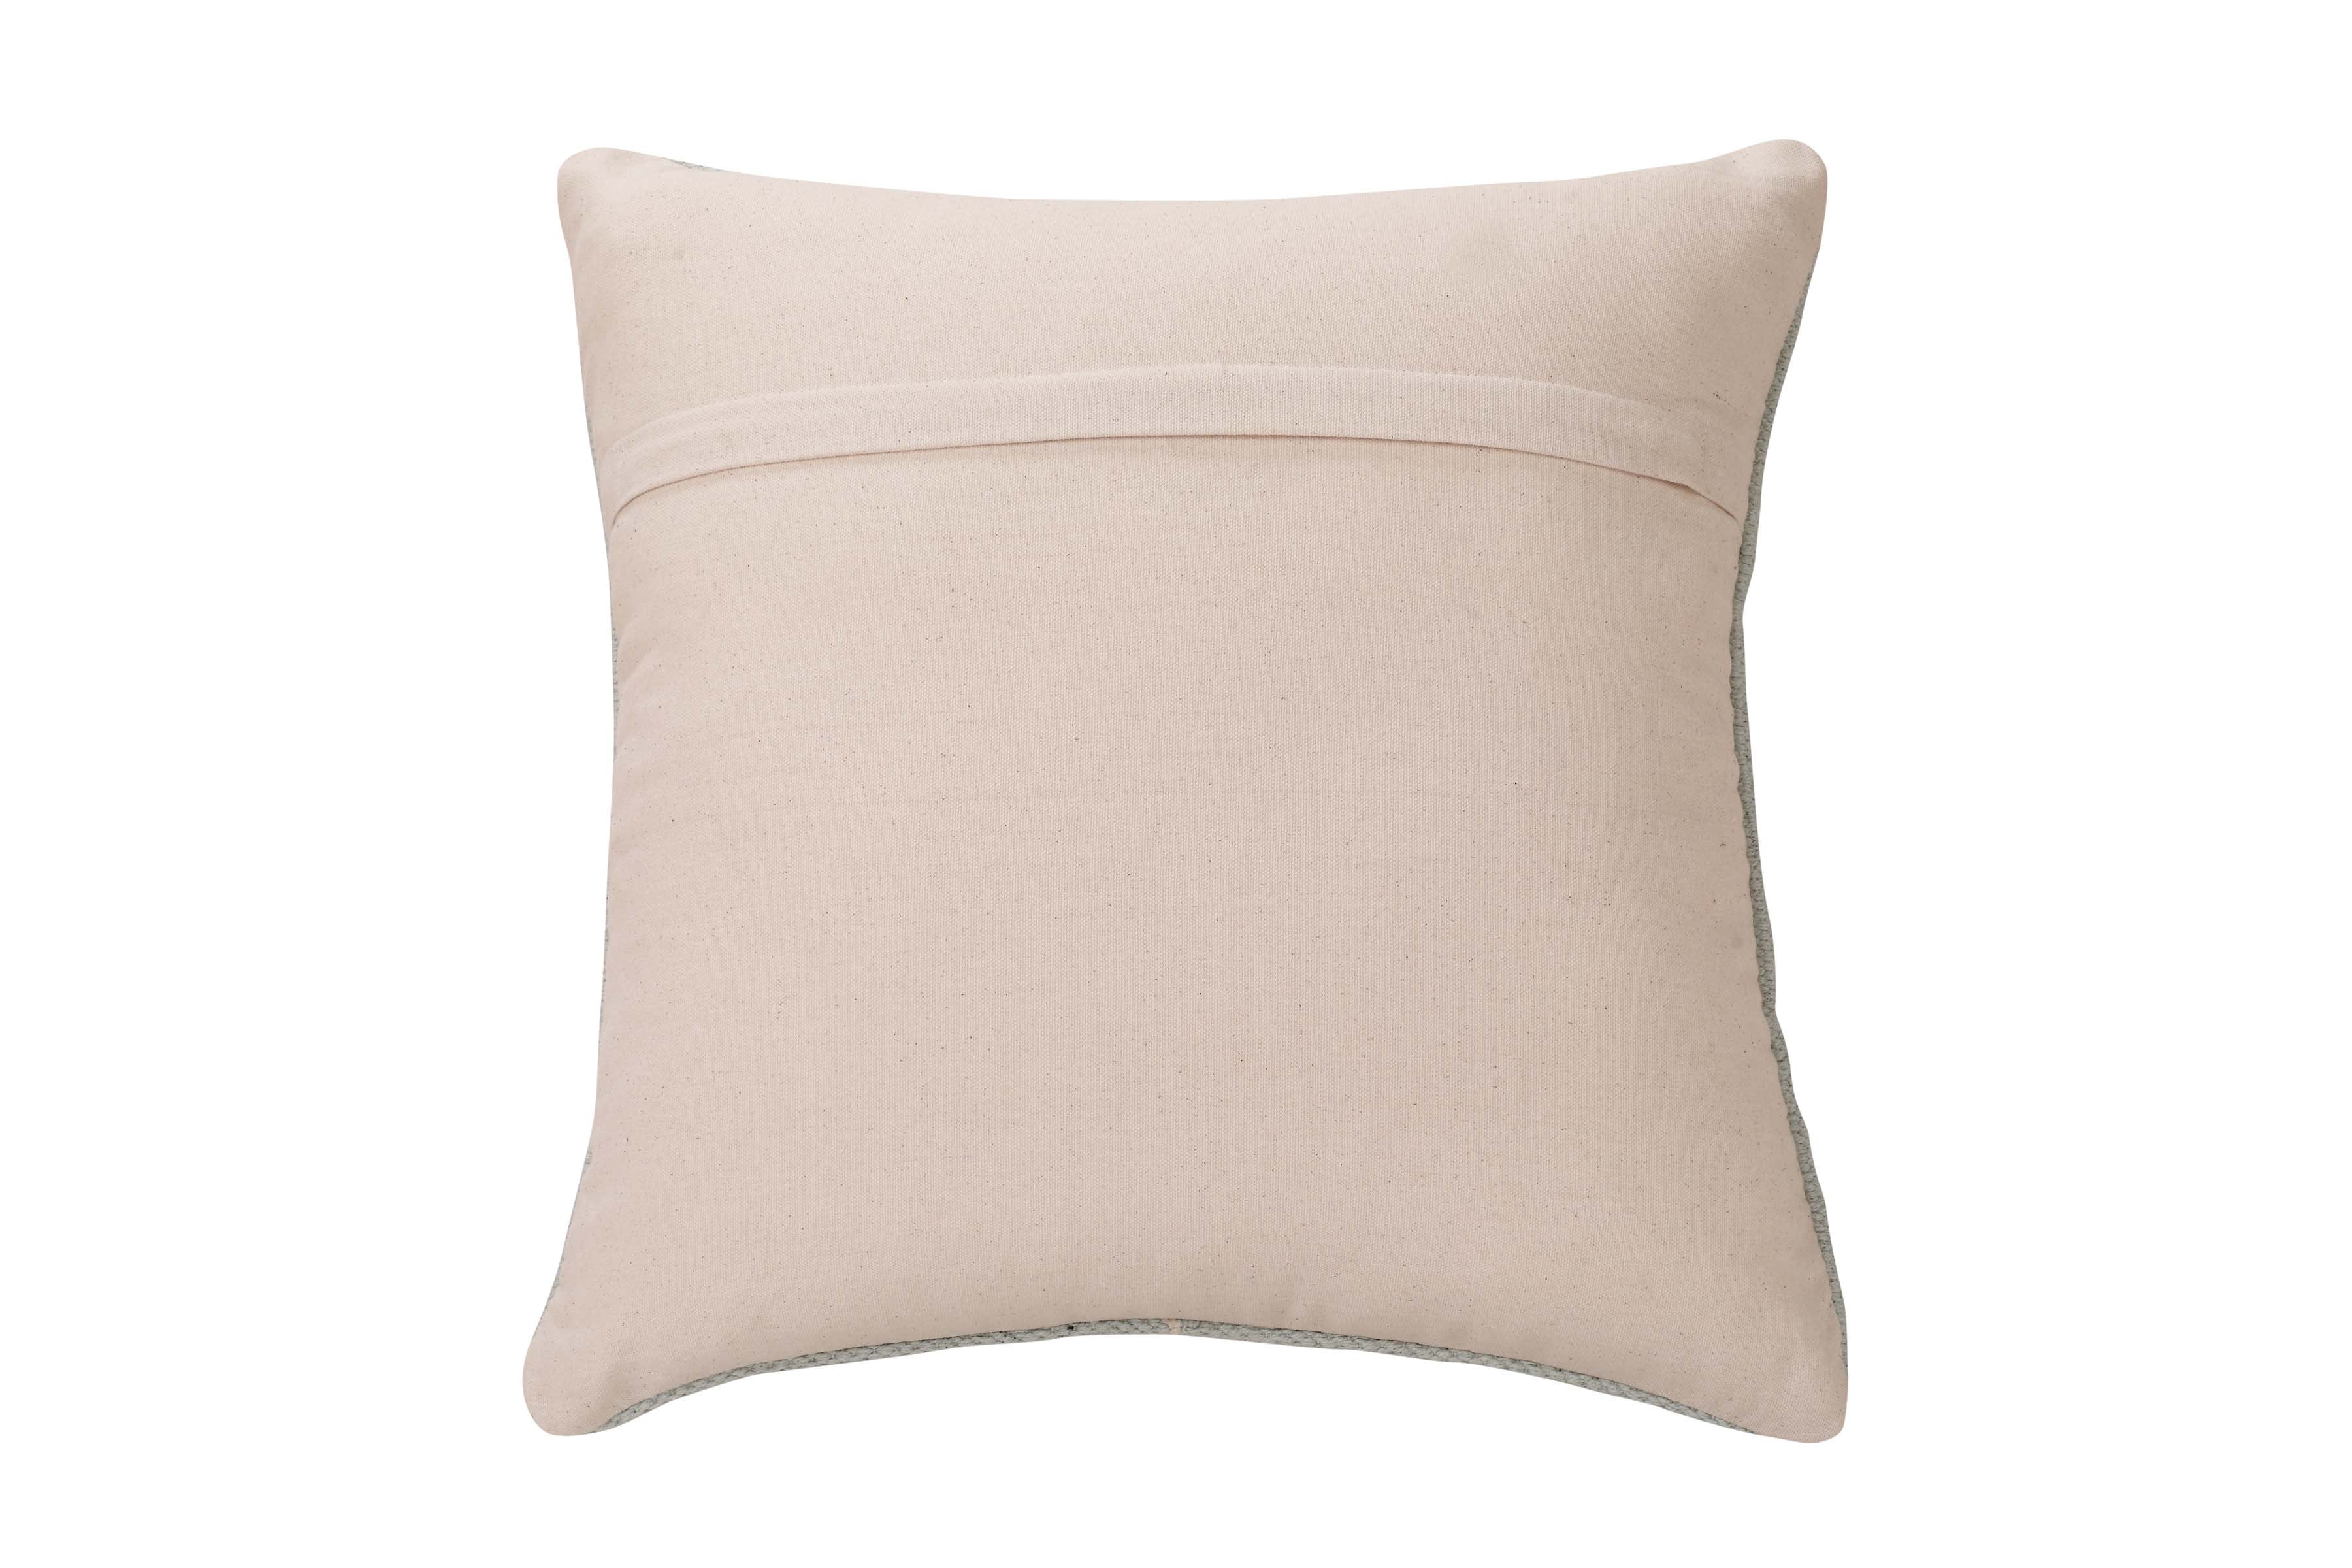 Terracotta 18 X 18 Throw Pillow, Comfort Colors Throw Pillows, Plain  Colored 18x18 Inch Accent Covers 